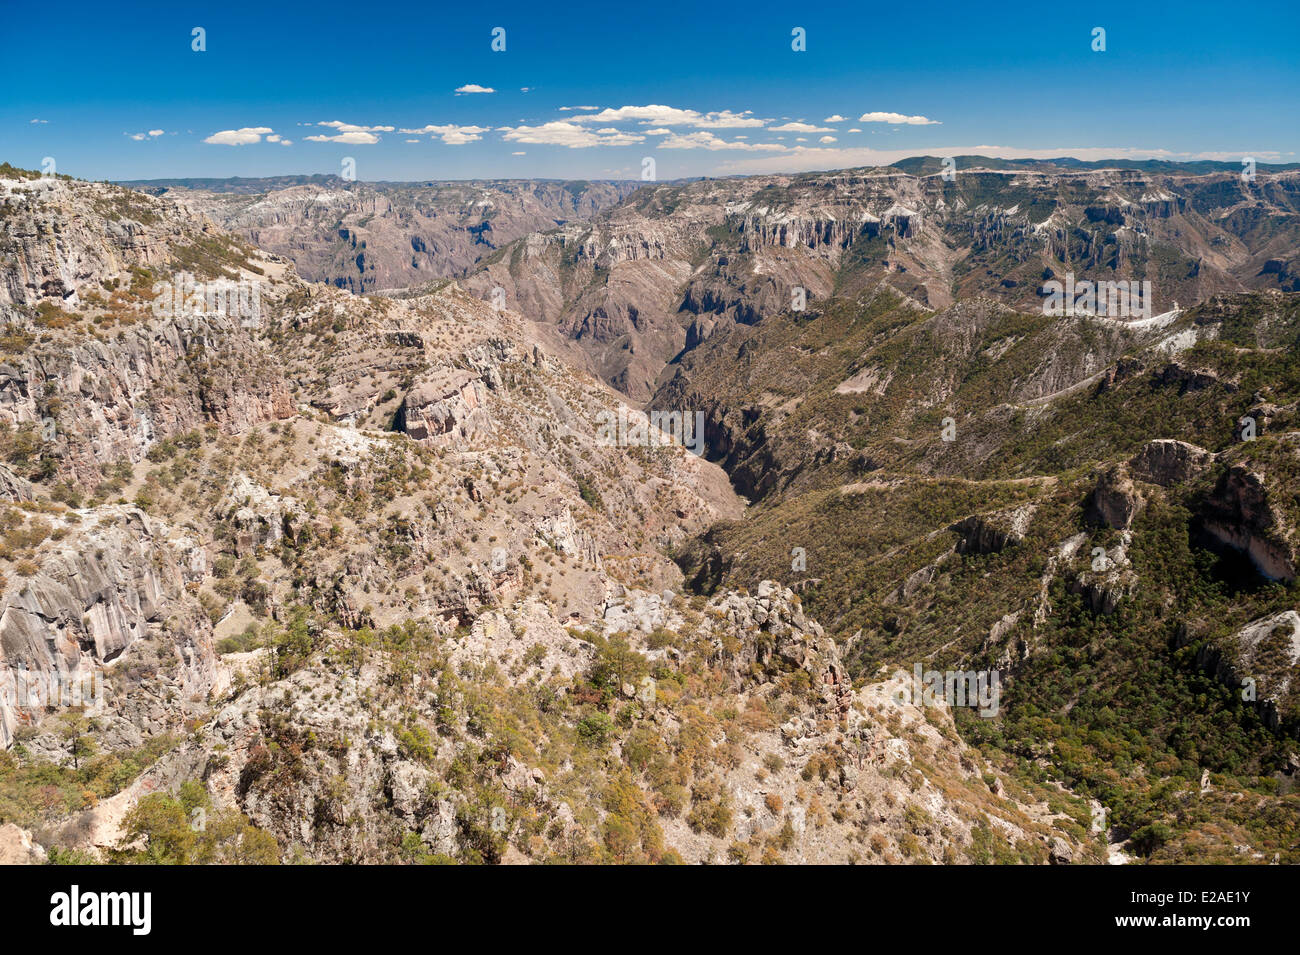 Mexico, Chihuahua State, Barranca del Cobre (Copper Canyon), the railway line (El Chepe) from Los Mochis to Chihuahua, the last Stock Photo